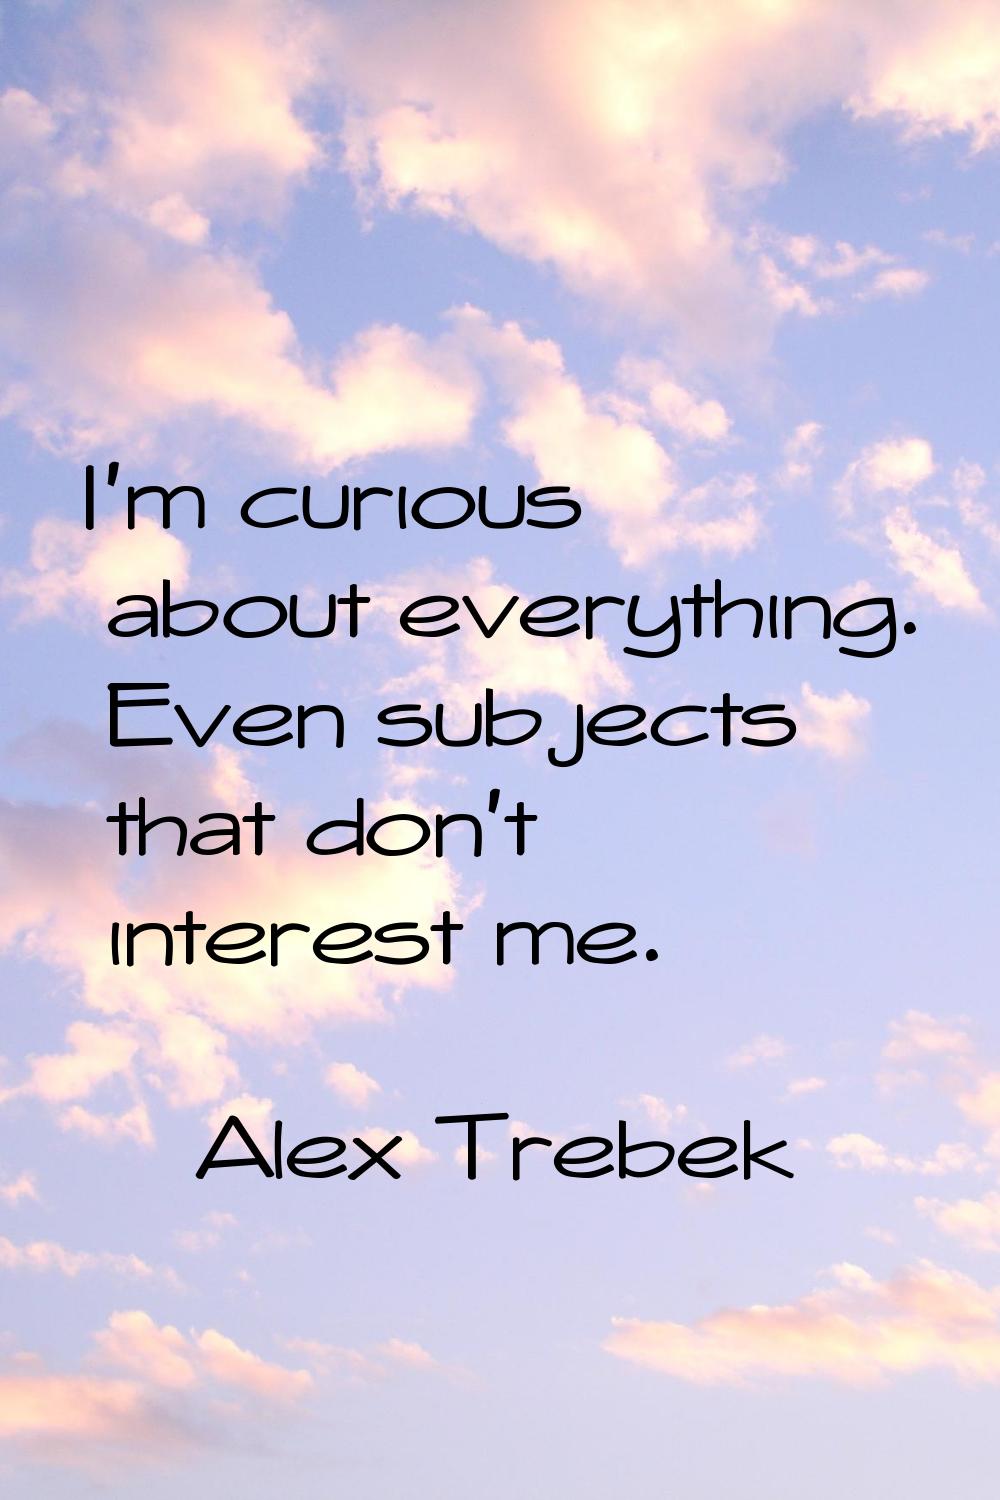 I'm curious about everything. Even subjects that don't interest me.